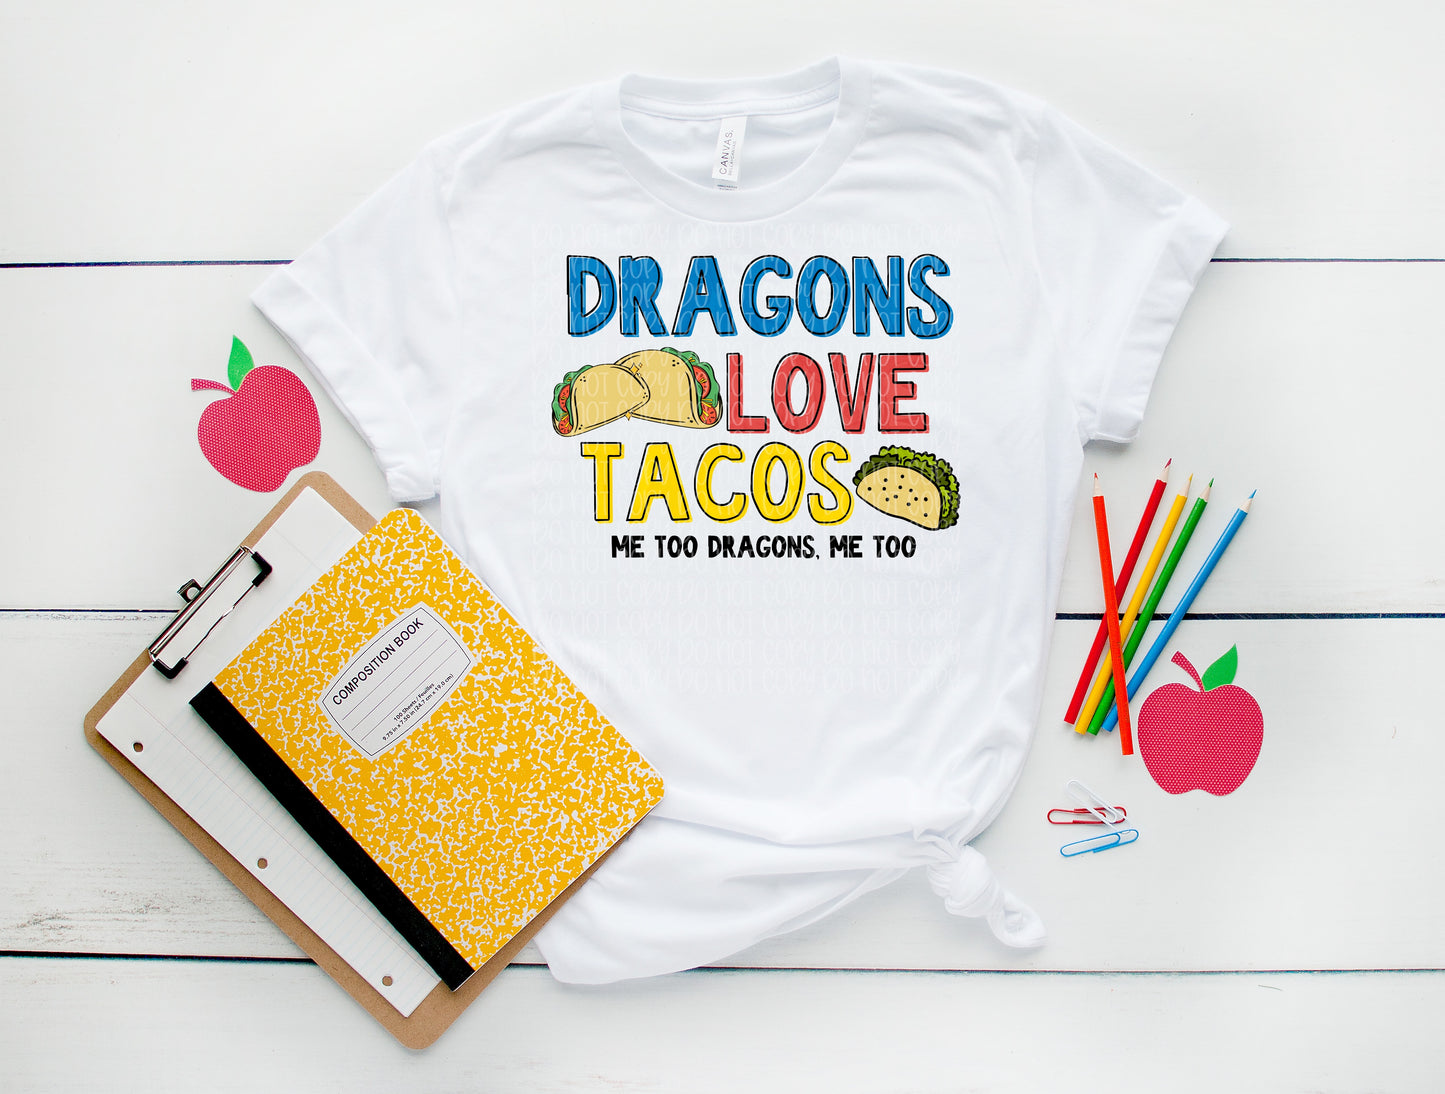 Dragons love tacos -book quote